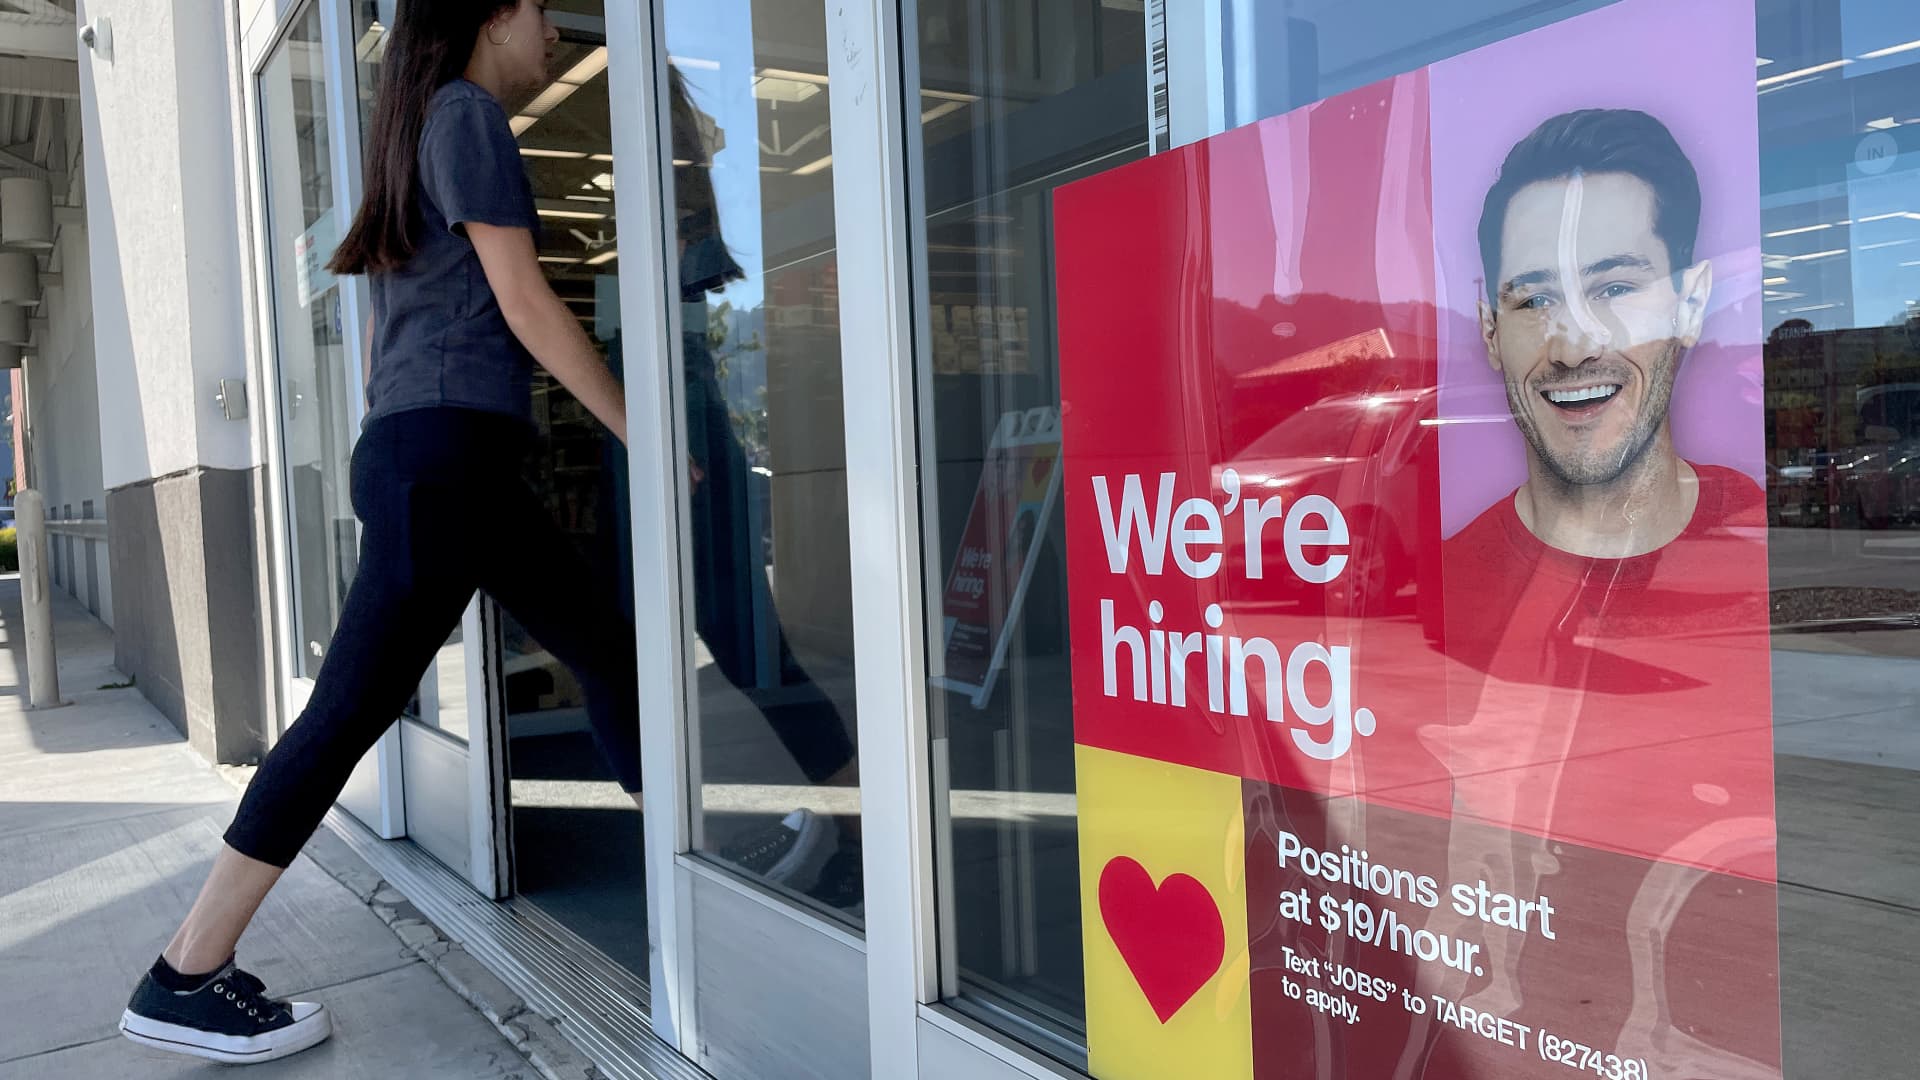 Private payrolls added 164,000 in December, beating expectations, ADP says